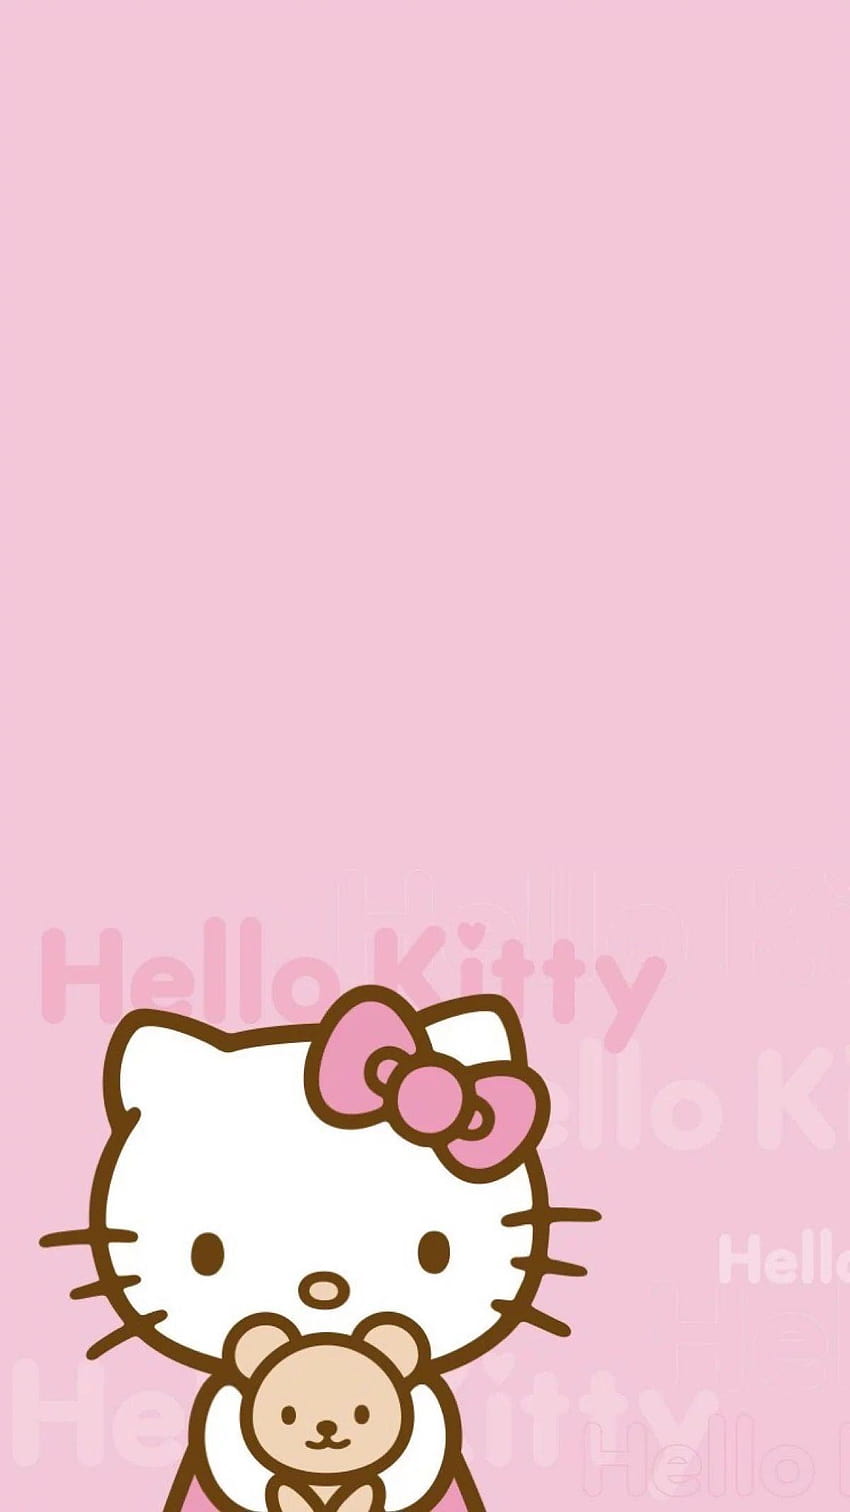 Hello Kitty Wallpapers Tablet - Wallpaper Cave